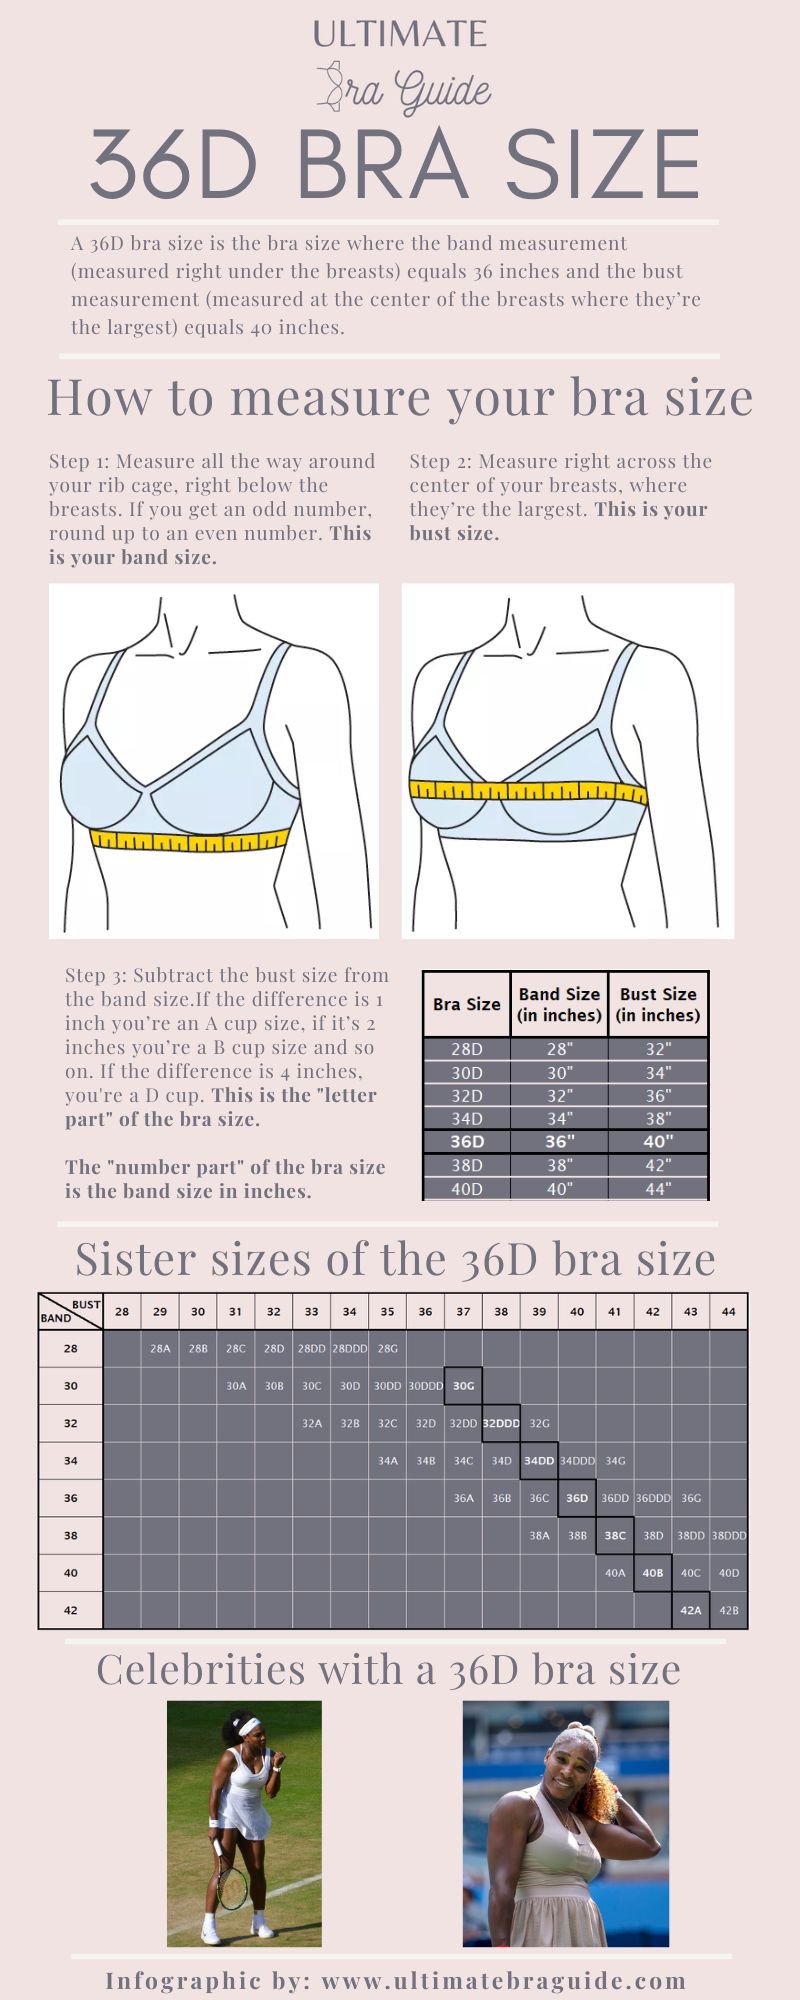 An infographic all about the 36D bra size - what it is, how to measure if you're 36D bra size, 36D bra sister sizes, 36D cup examples, and so on